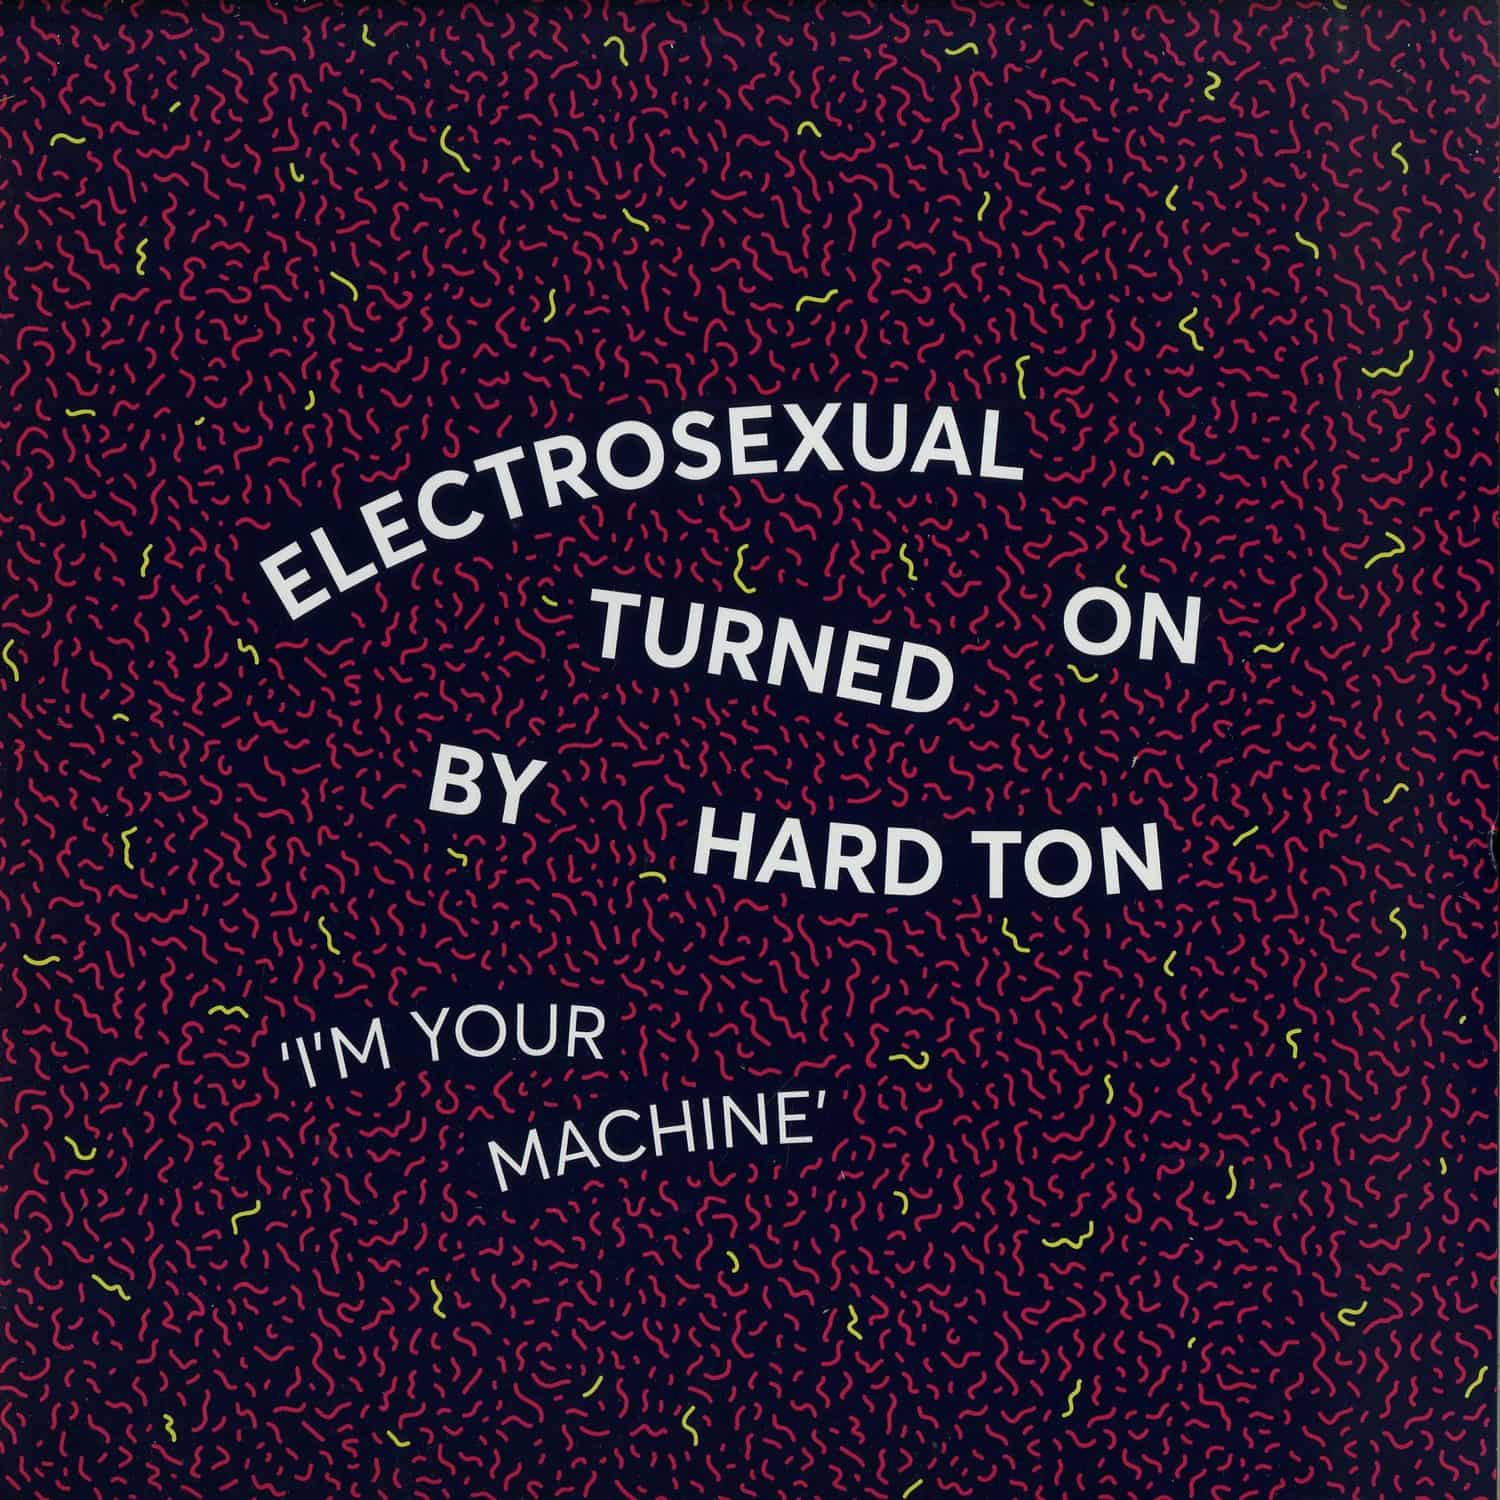 Electrosexual Turned On By Hard Ton - IM YOUR MACHINE